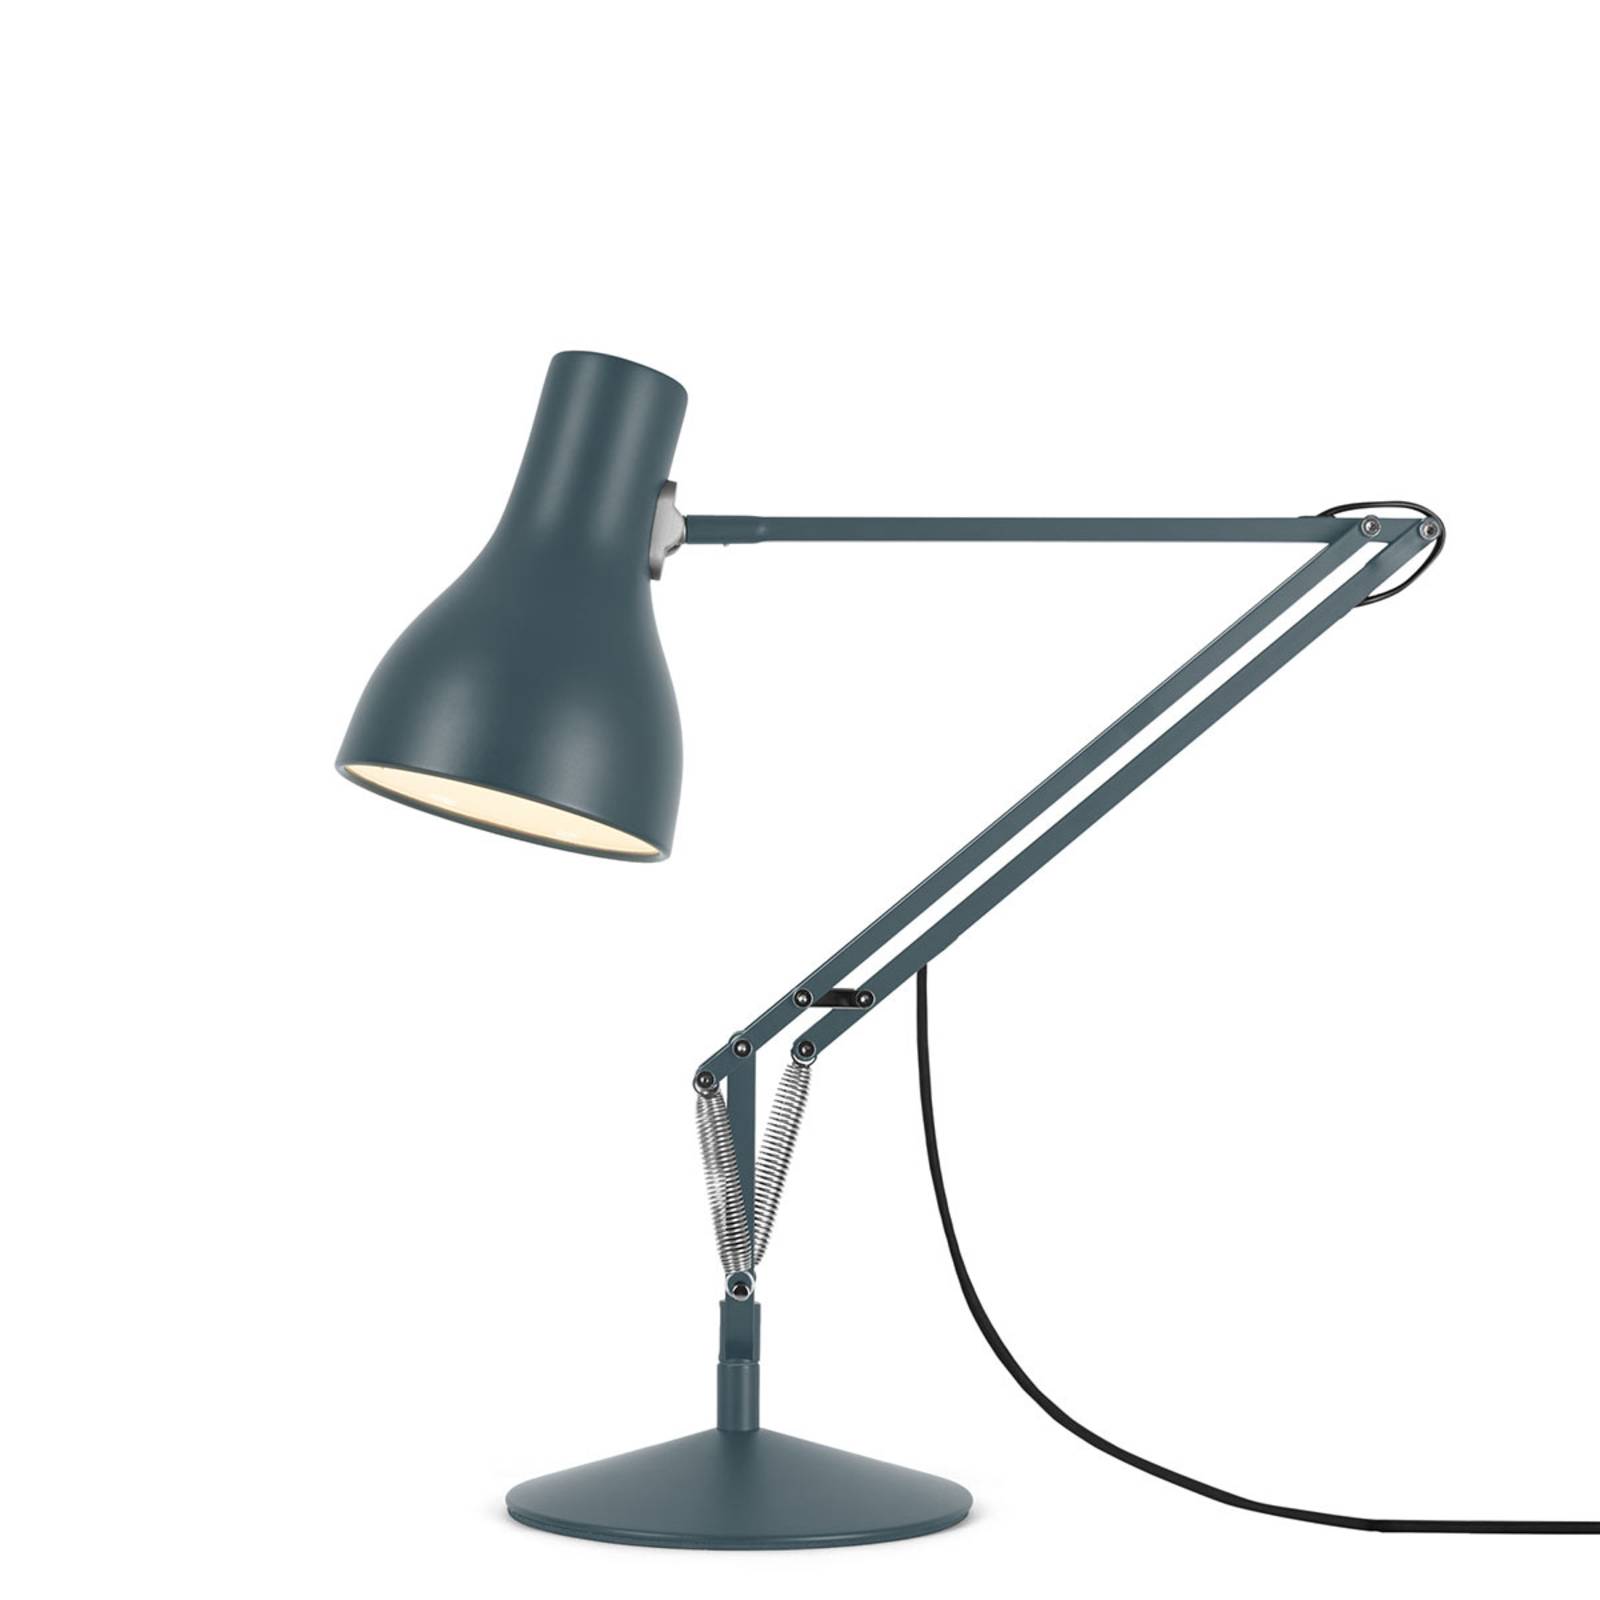  Anglepoise Anglepoise Type 75 Tischlampe Schiefergrau 